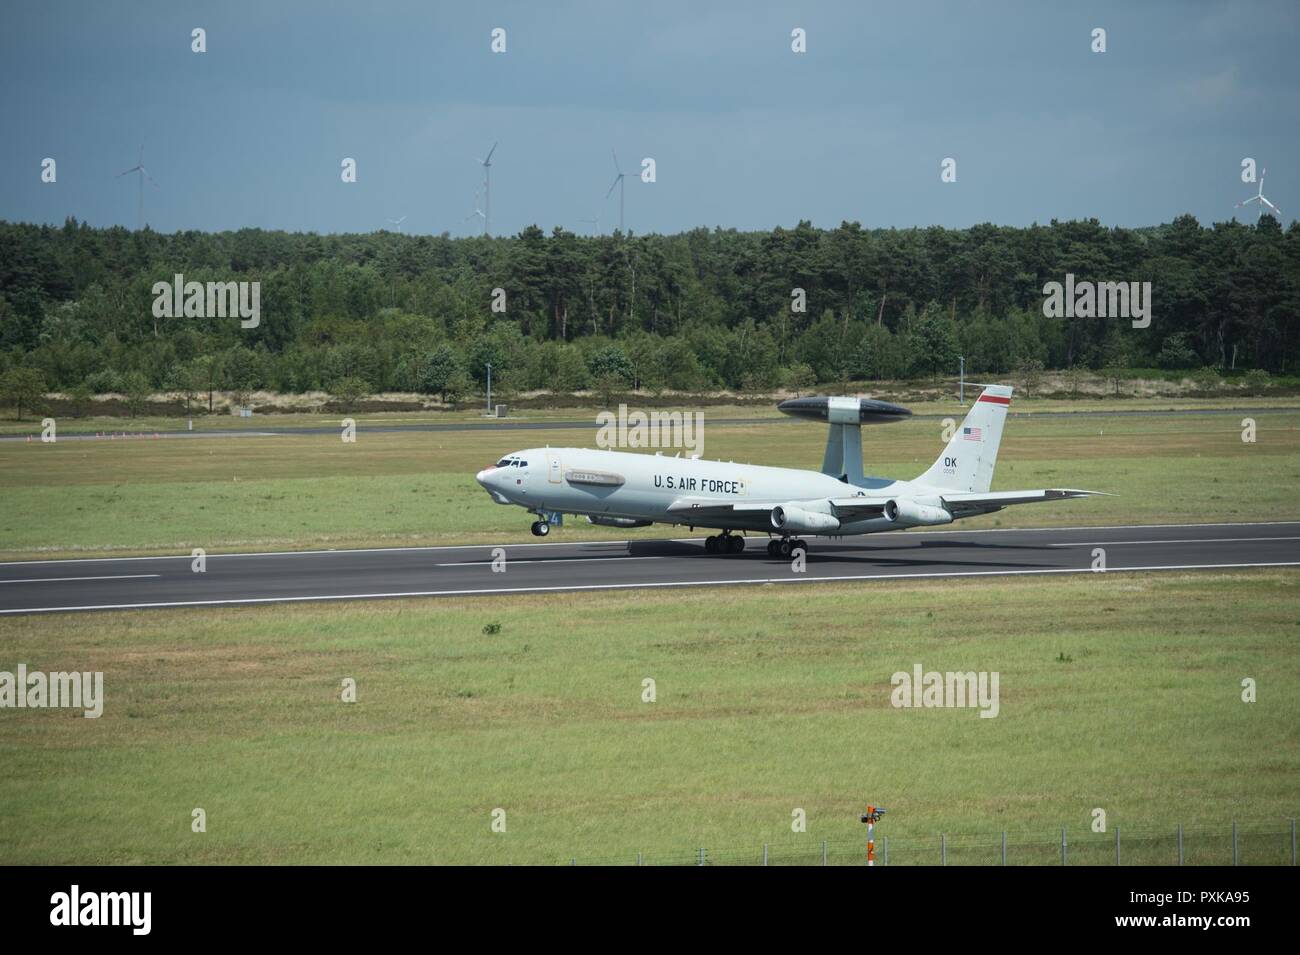 A U.S Air Force E-3 Sentry takes off June 7, 2017, at NATO Air Base Geilenkirchen, Germany in support of BALTOPS 2017. The aircraft and nearly 100 reservists from the 513th Air Control Group are deployed in support of the exercise, which is the first time a U.S. E-3 Sentry has supported a NATO exercise in 20 years. Stock Photo